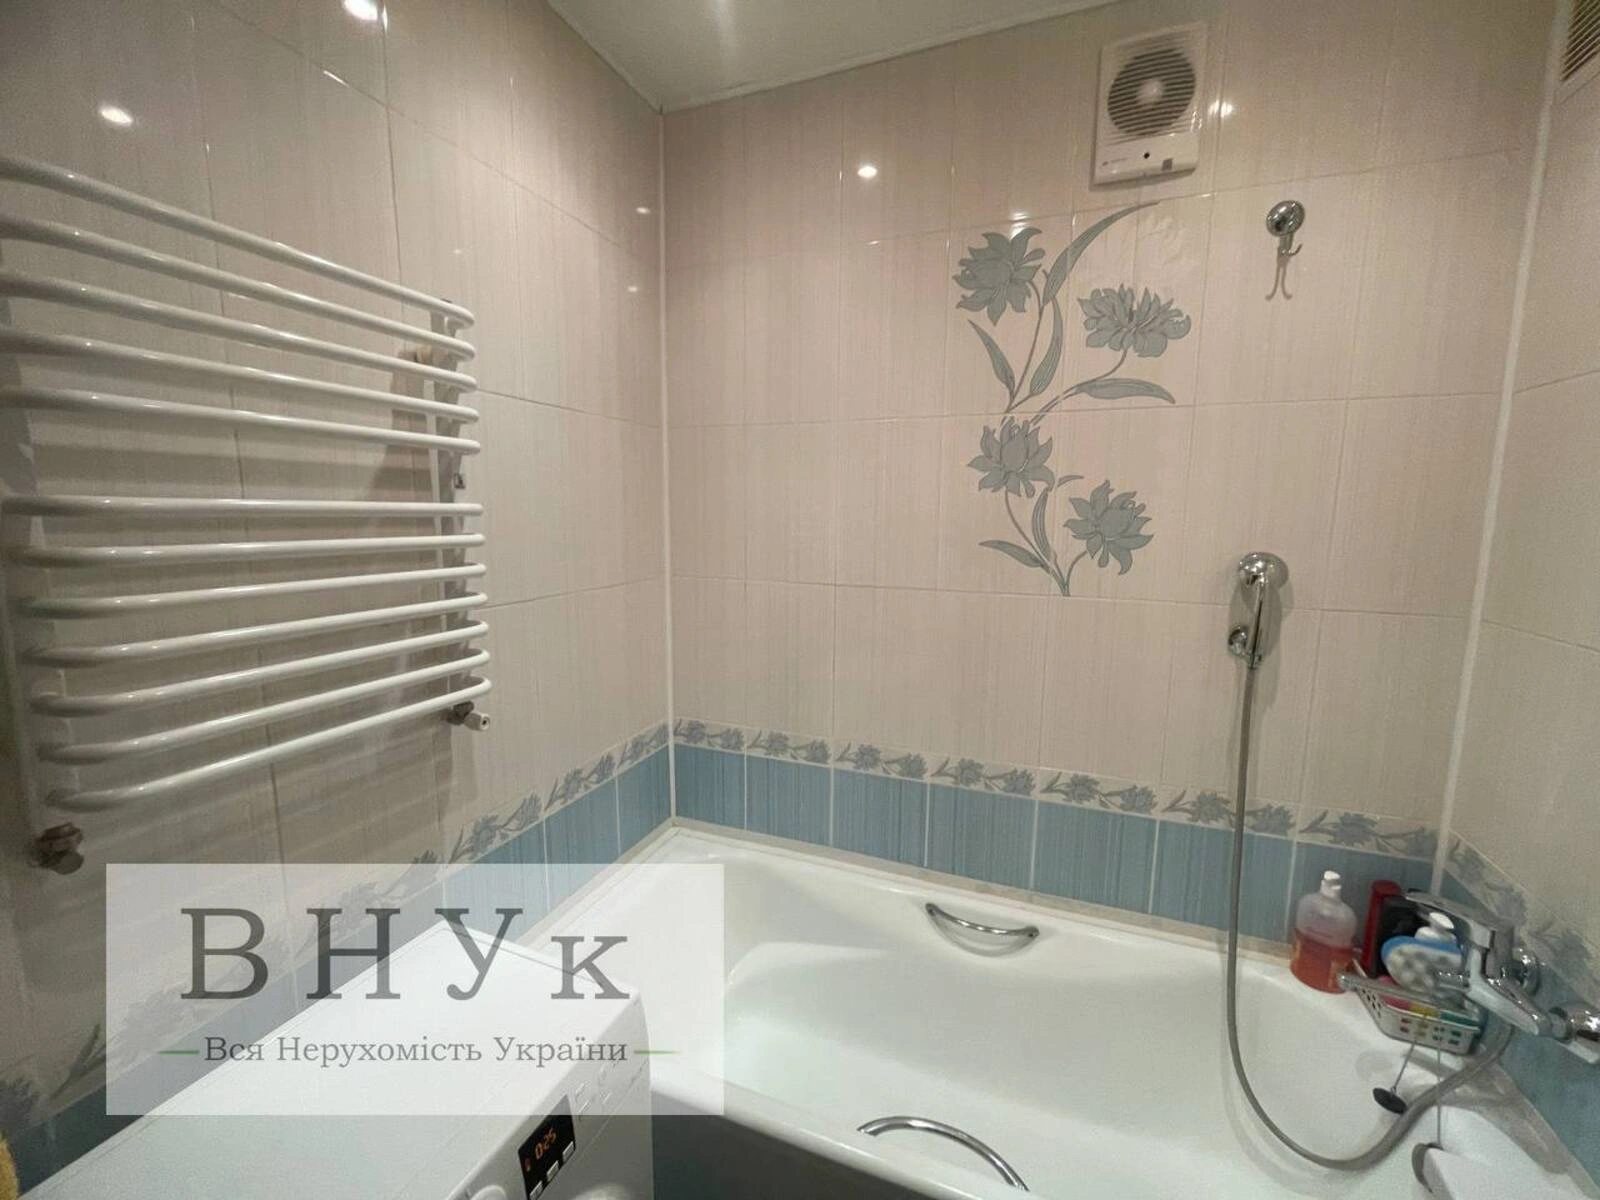 Apartments for sale. 4 rooms, 86 m², 1st floor/5 floors. Budnoho S. , Ternopil. 